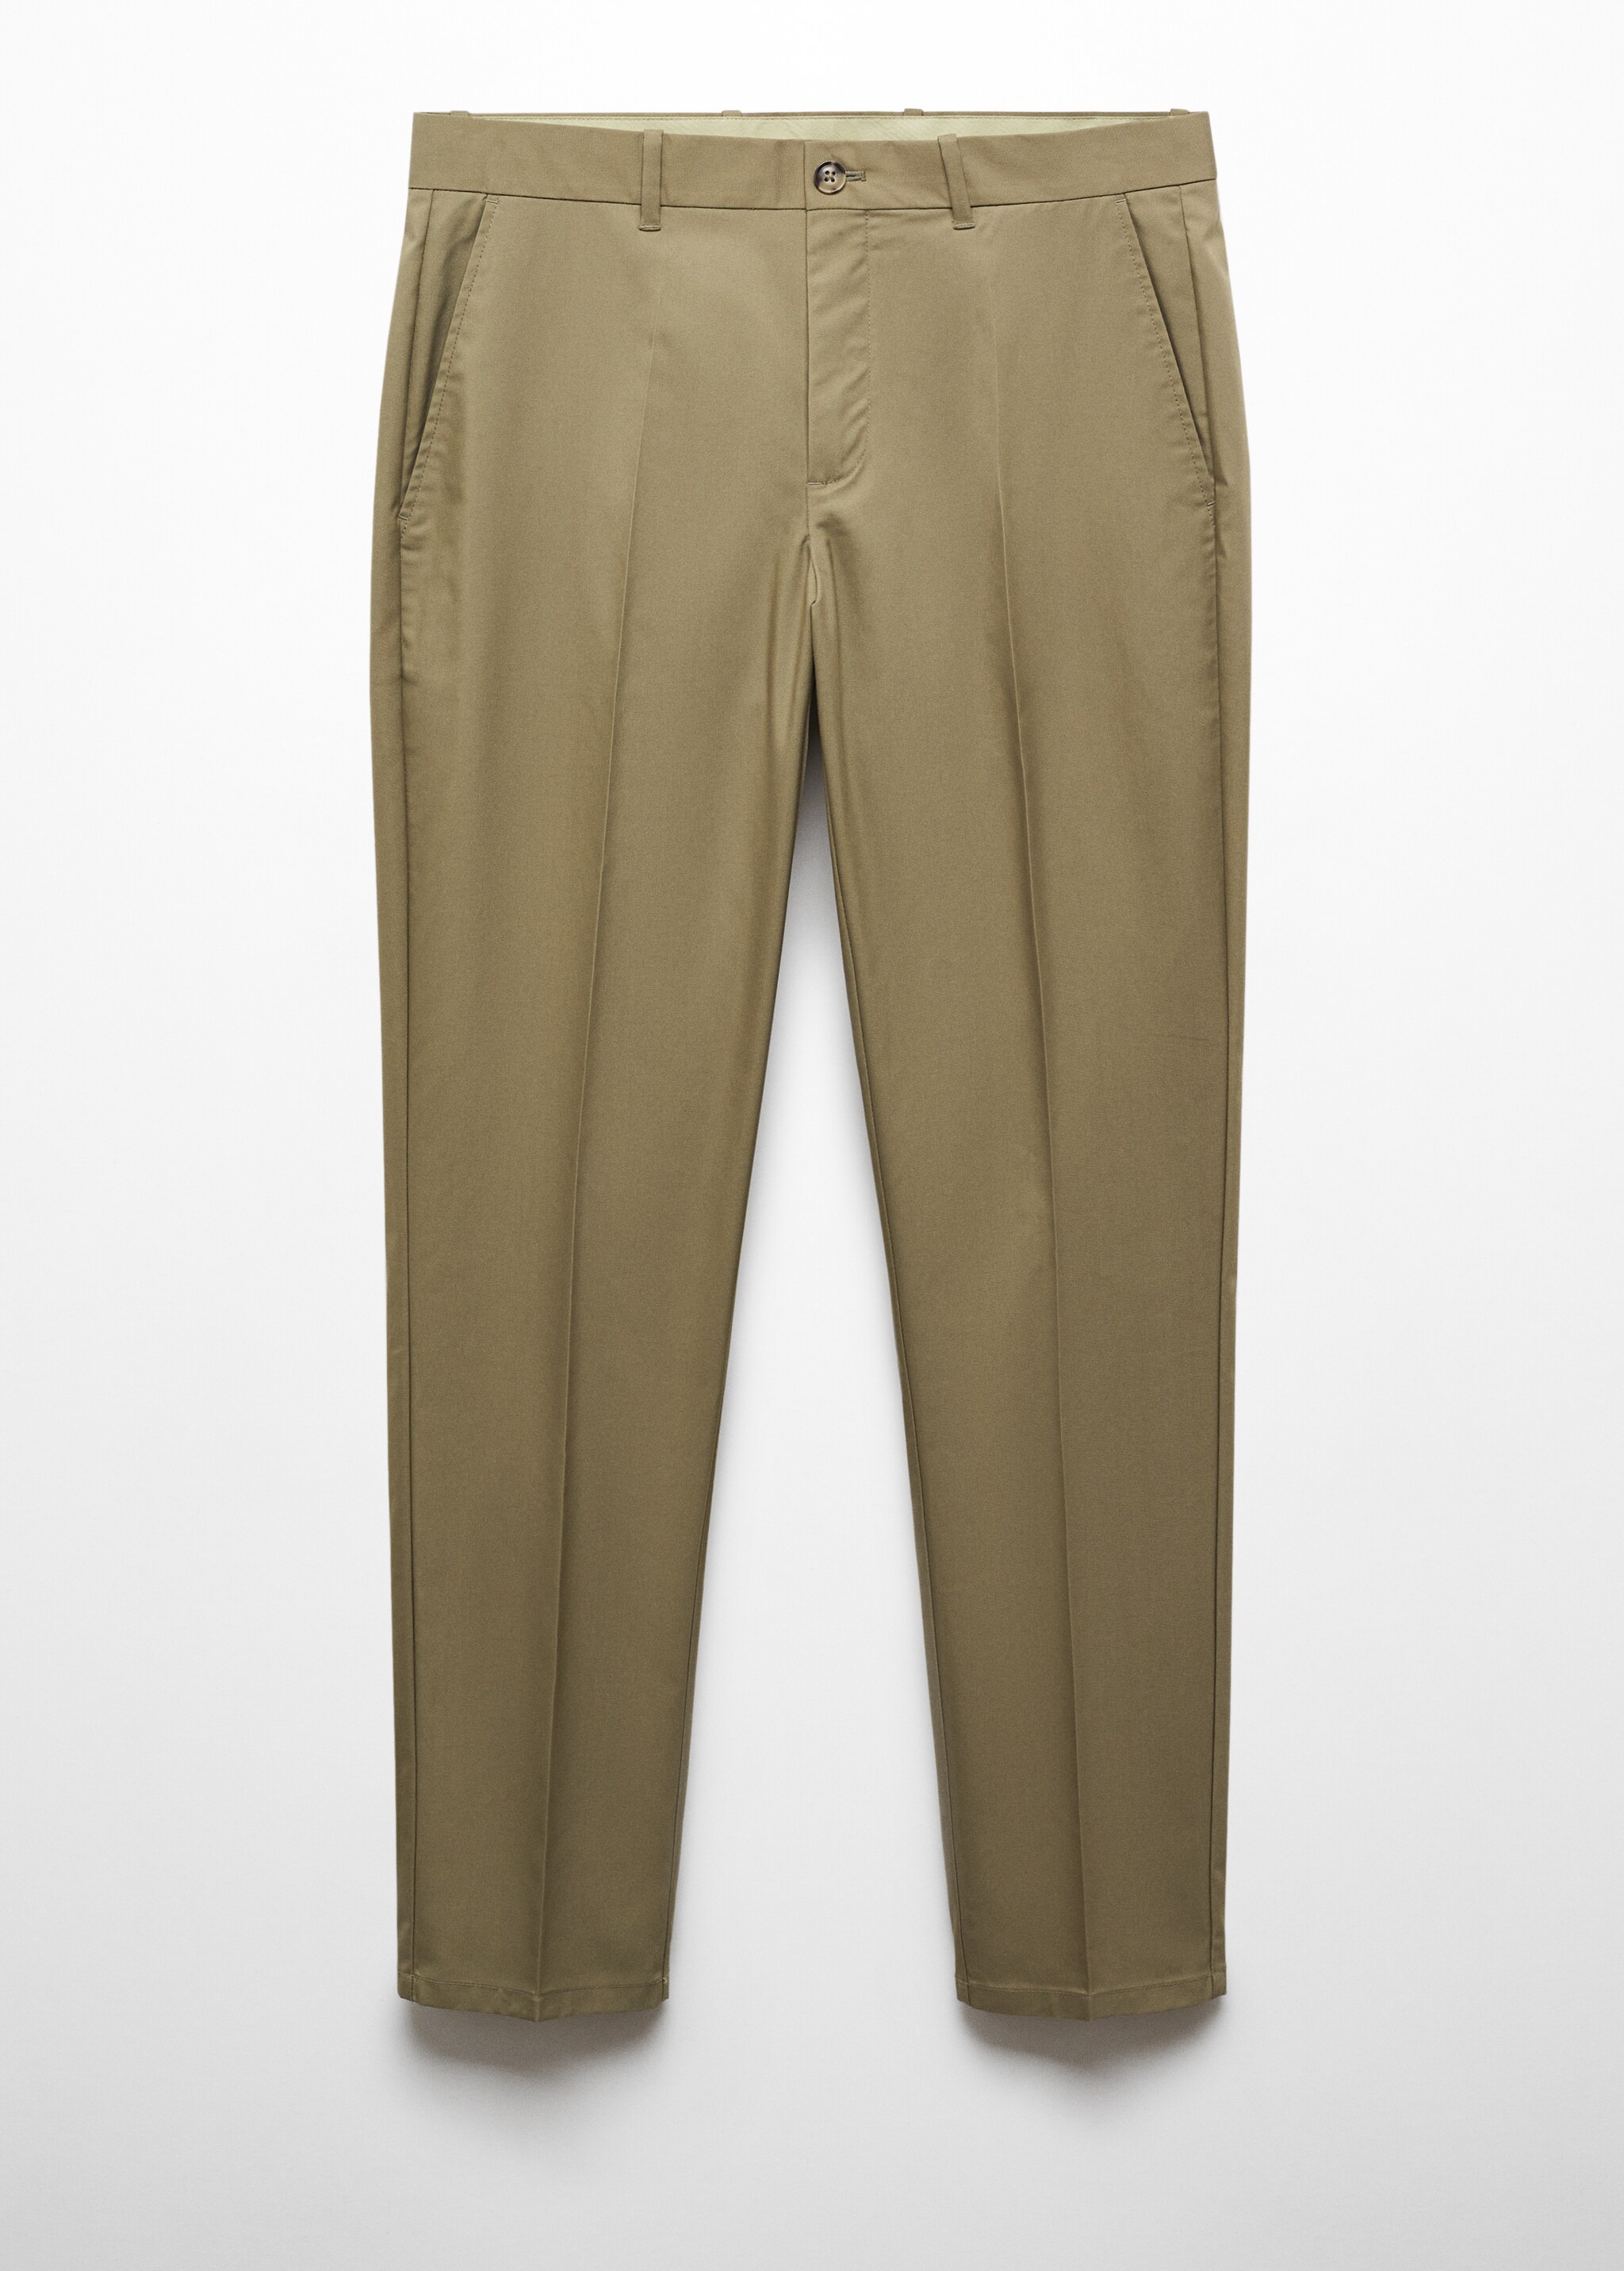 Slim fit lyocell pants - Article without model